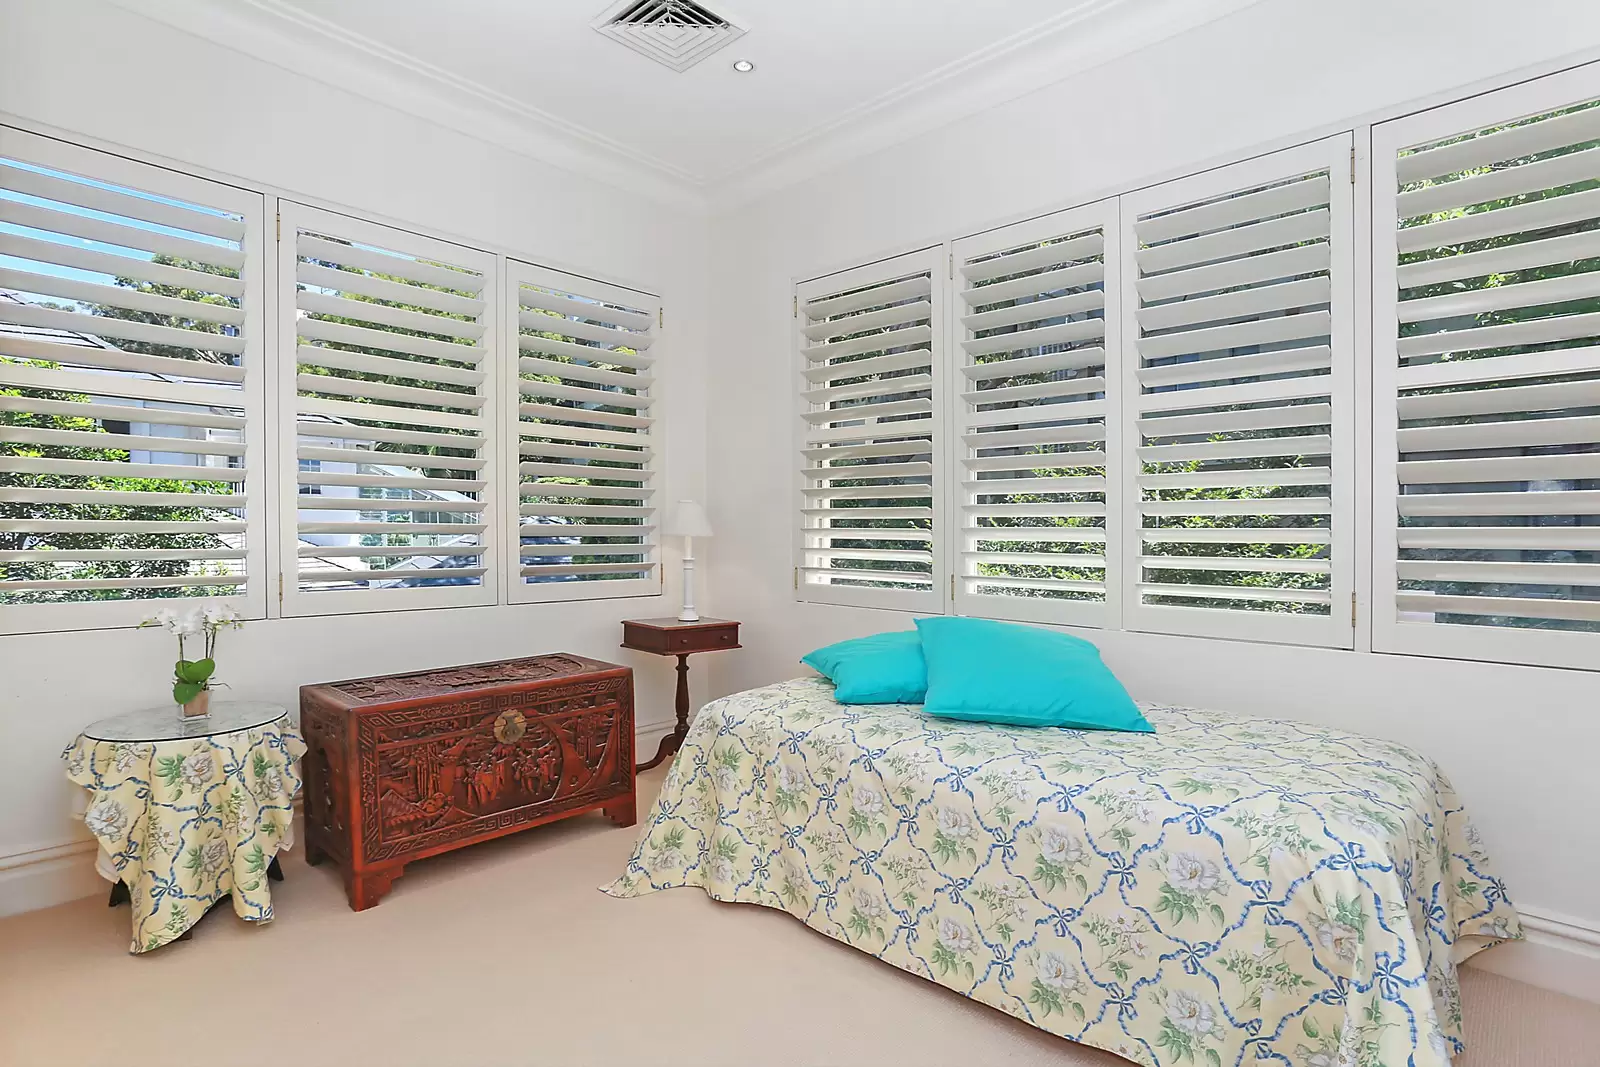 Photo #7: 29 Etham Avenue, Darling Point - Sold by Sydney Sotheby's International Realty